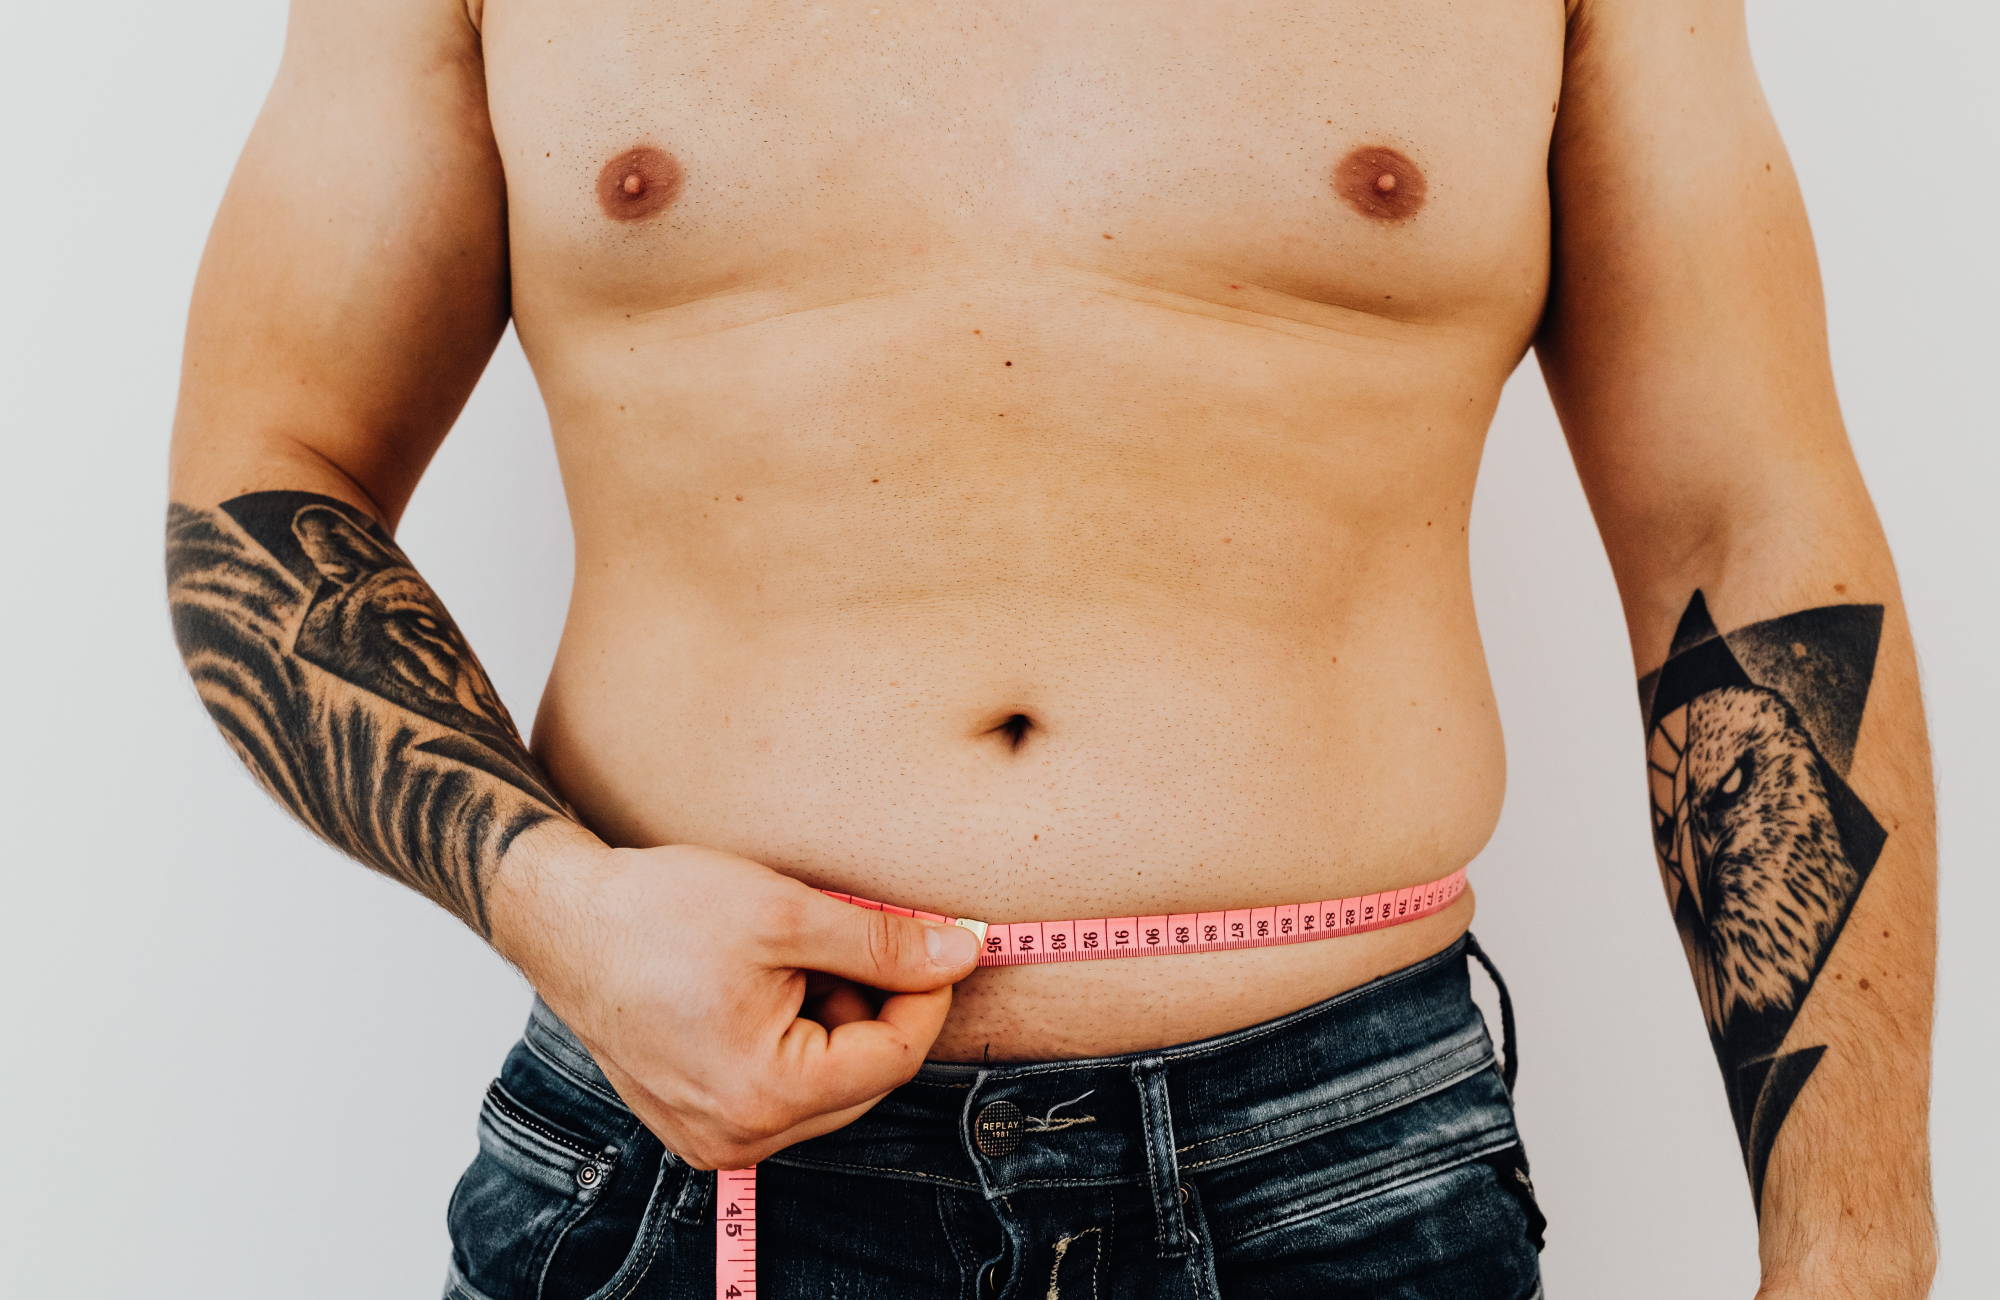  A shirtless man with arm tattoos wearing dark jeans measures his abdomen with a pink tape measurer.